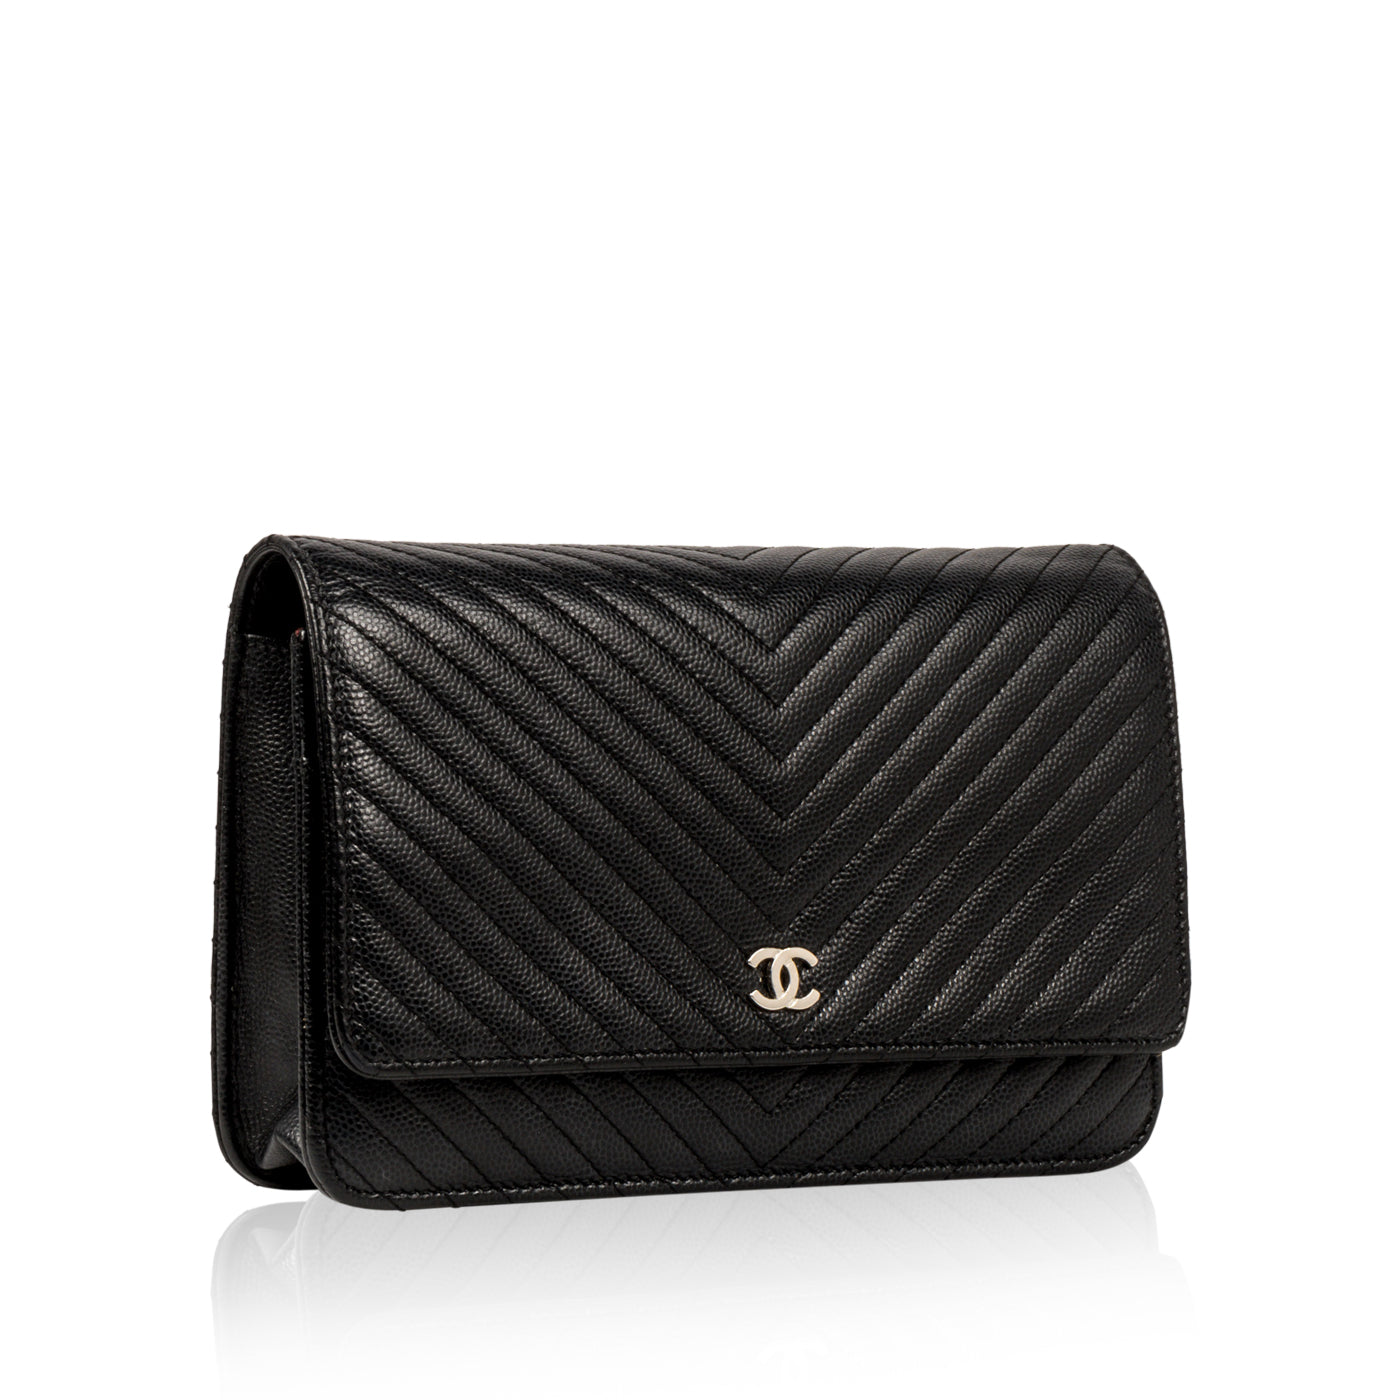 small black chanel bags new